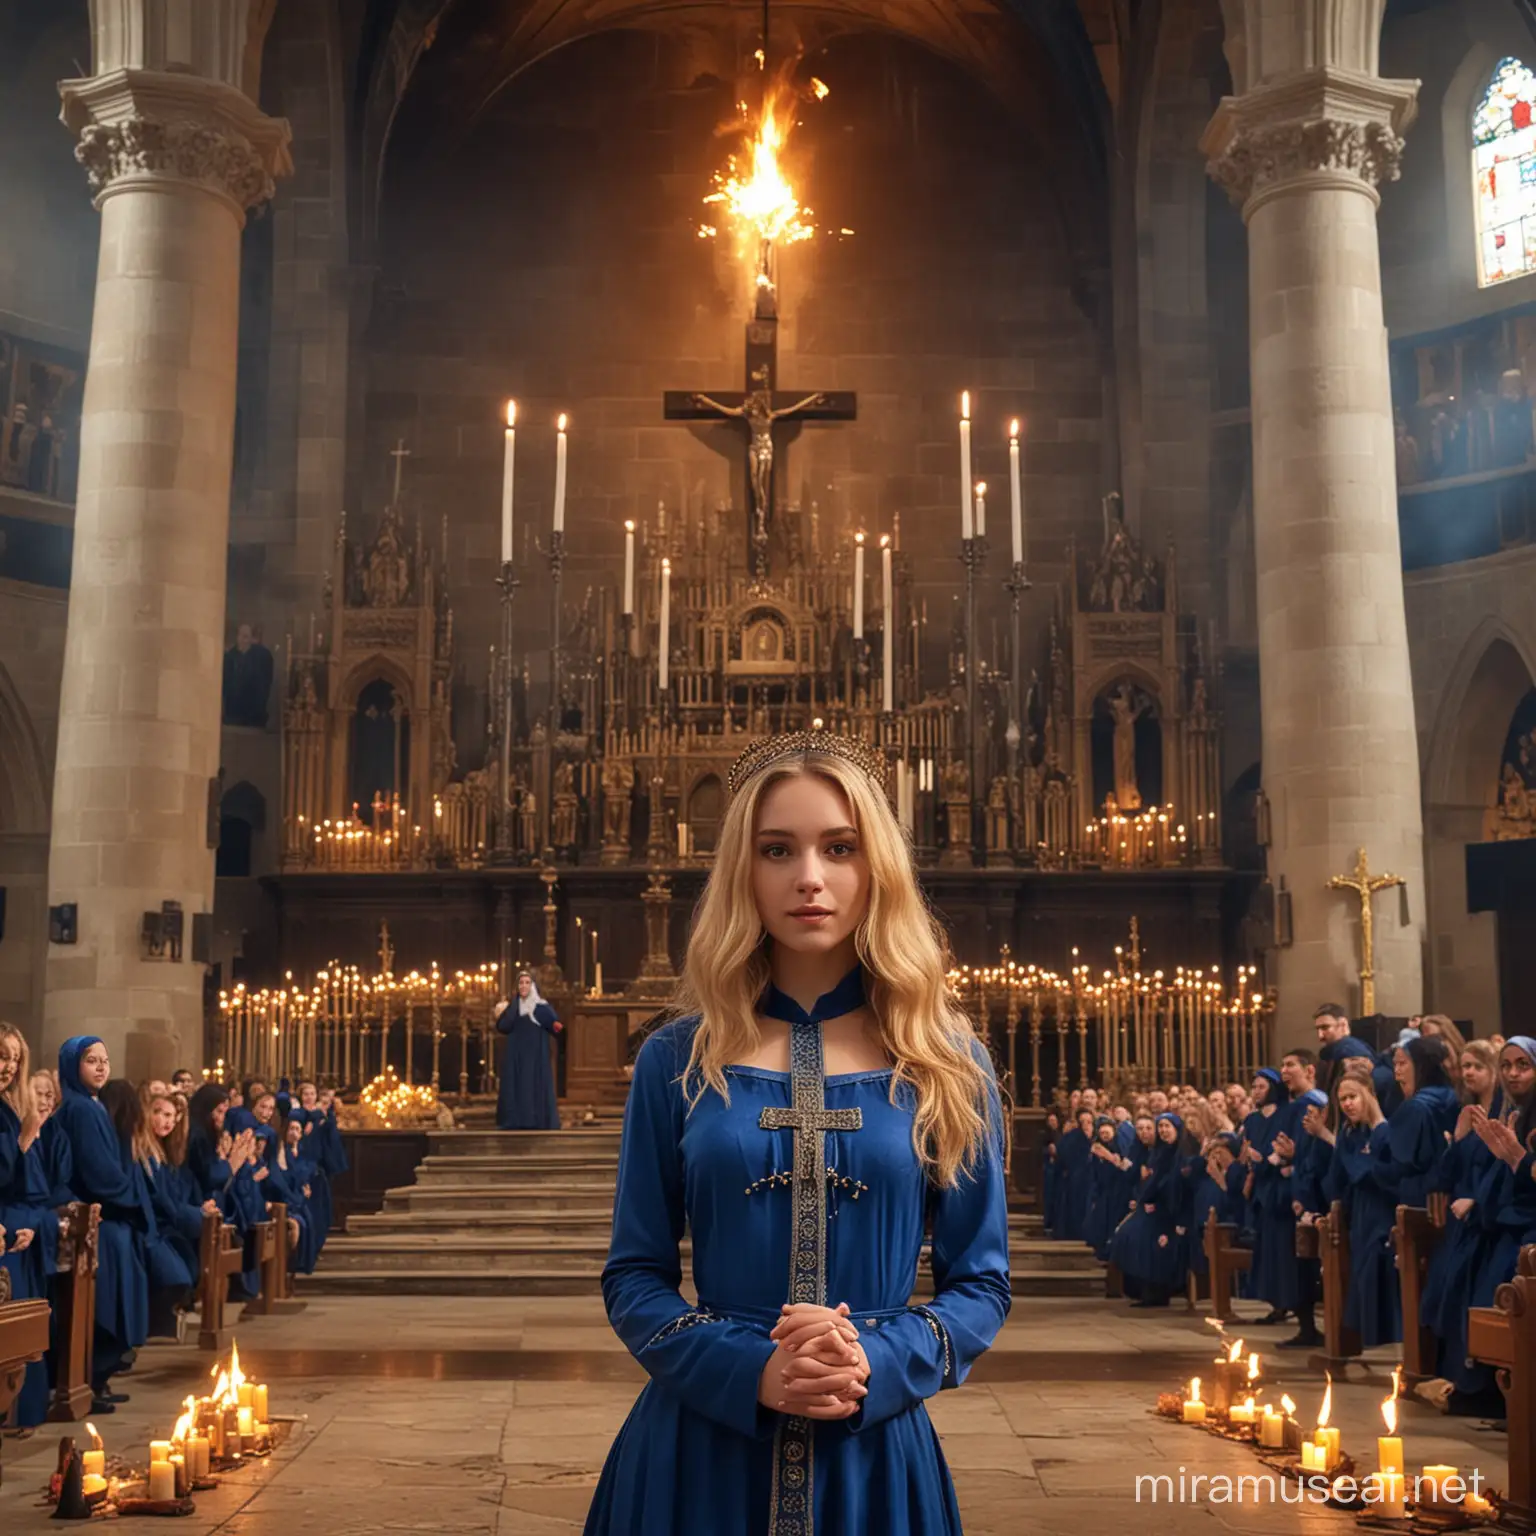 Teenage Empress Goddess in Blue Outfit and Rabbi Clothes at Altar in Old Catholic Church